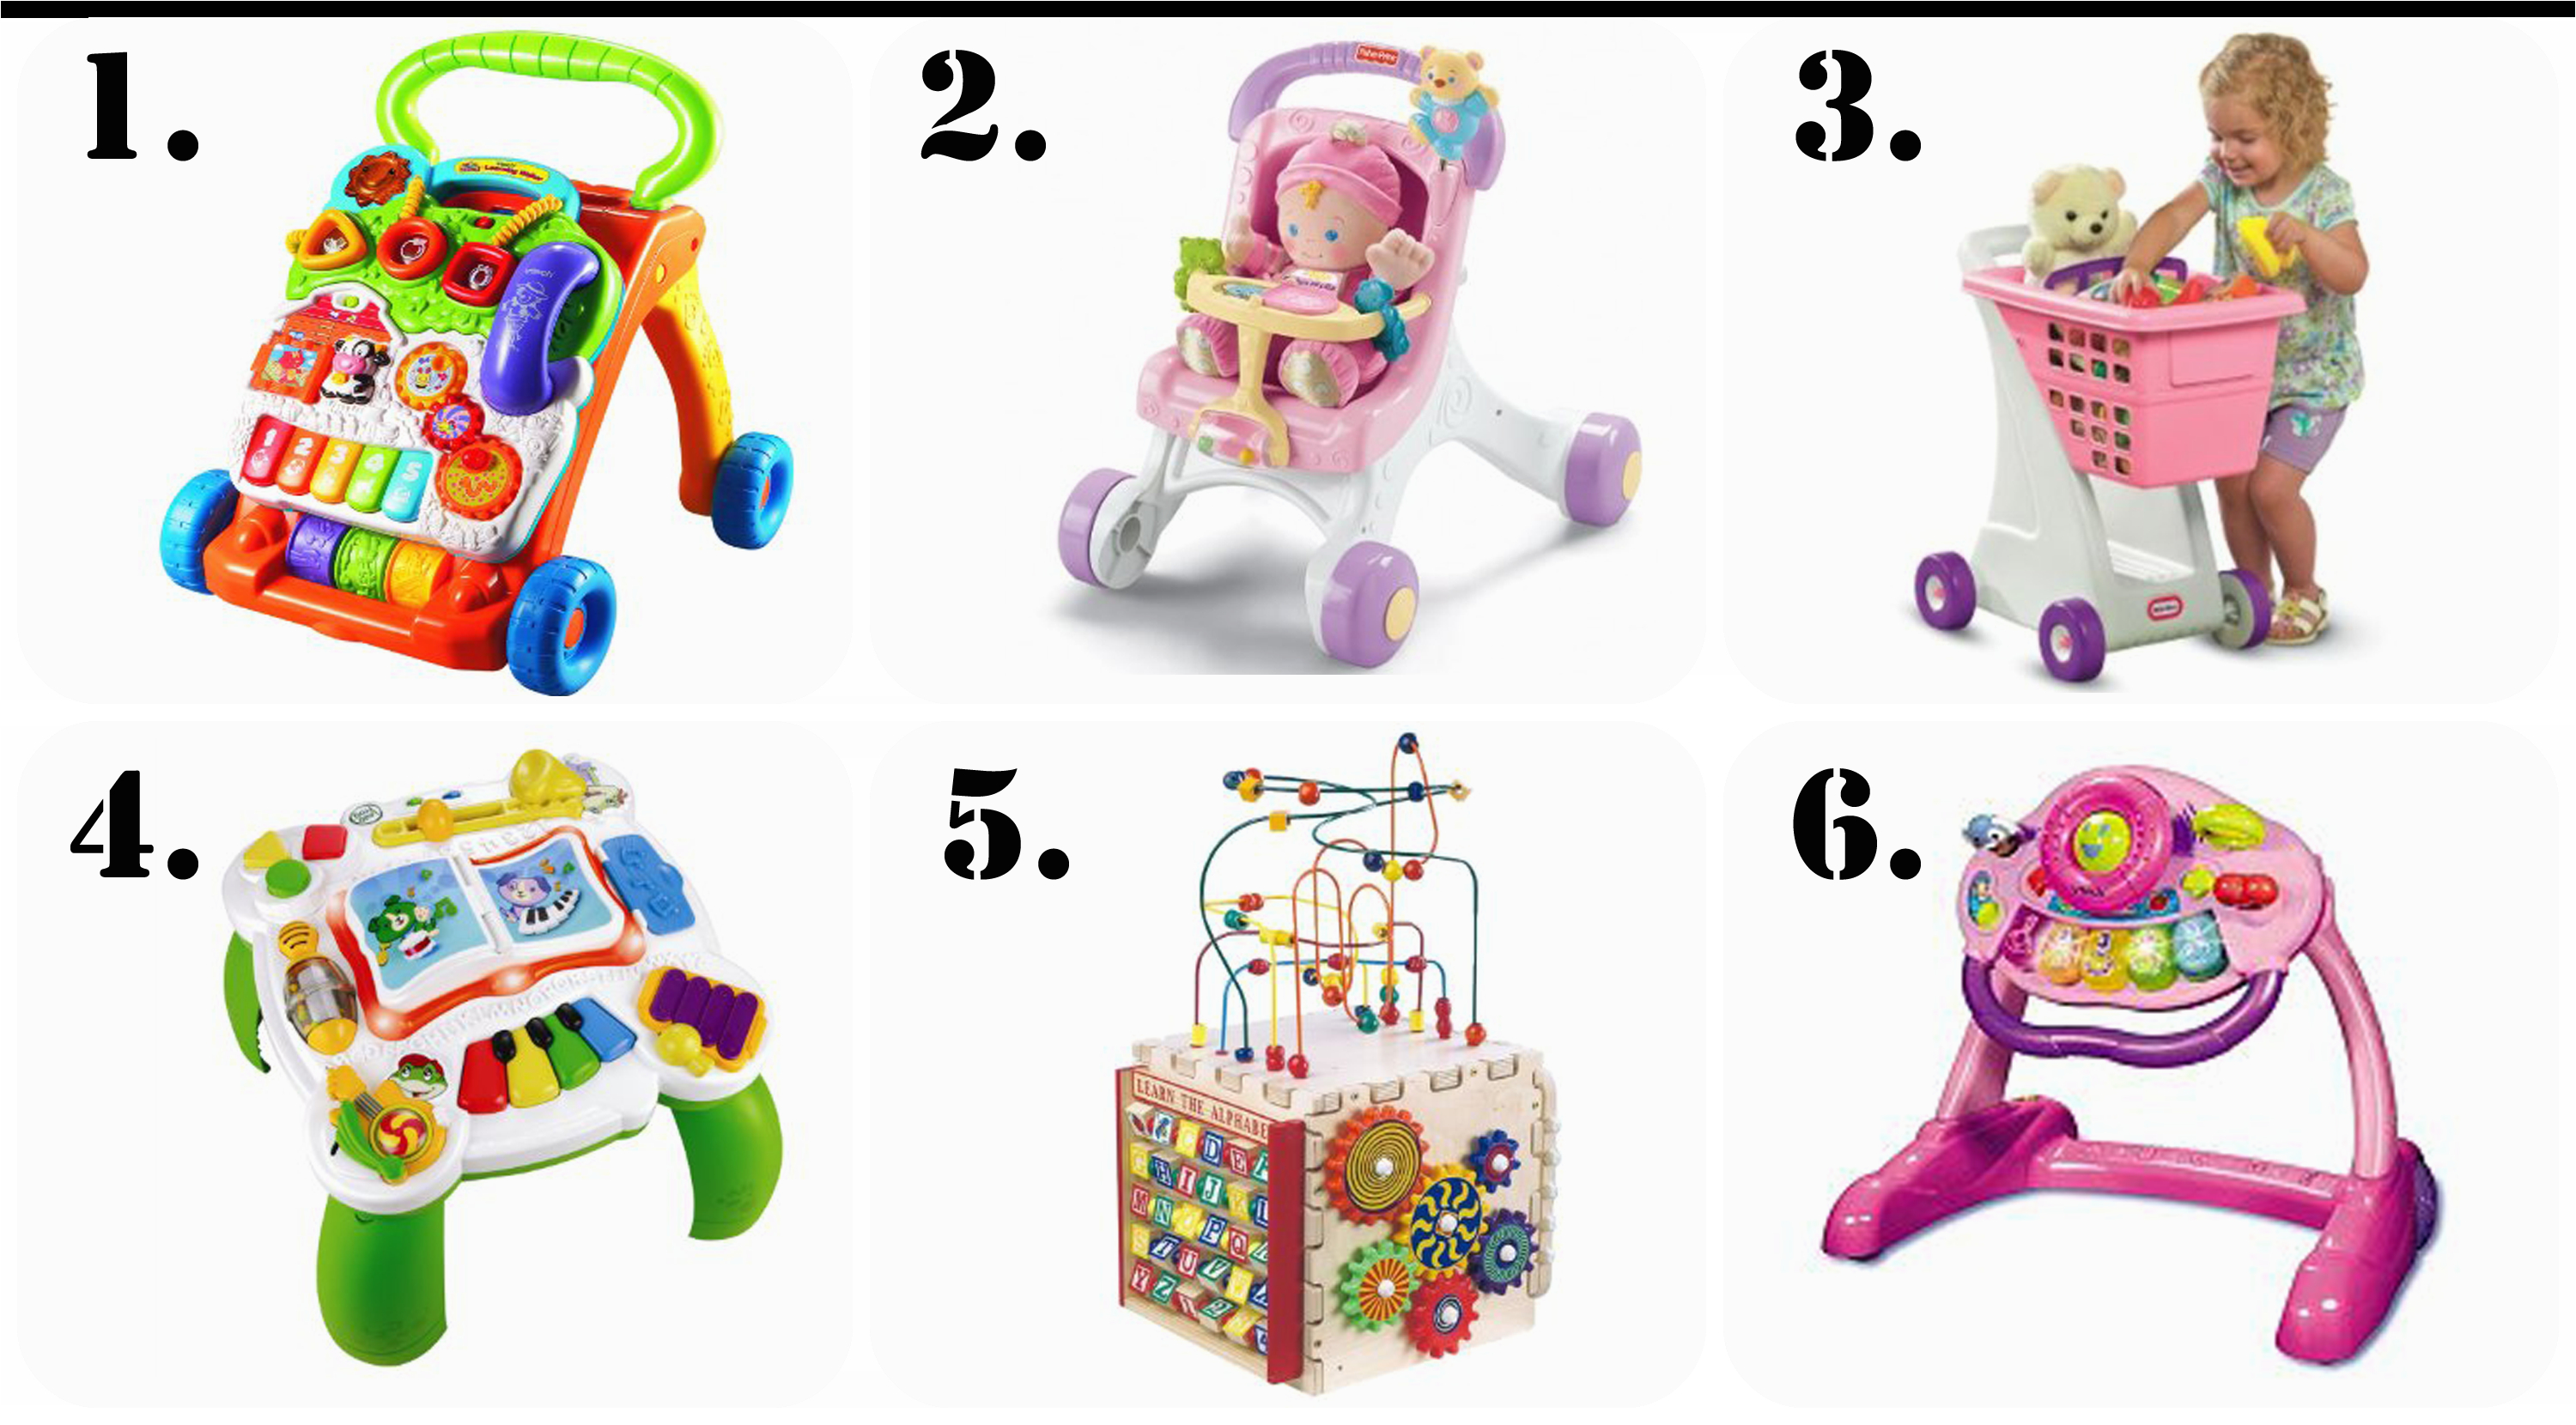 the ultimate gift list for a 1 year old girl